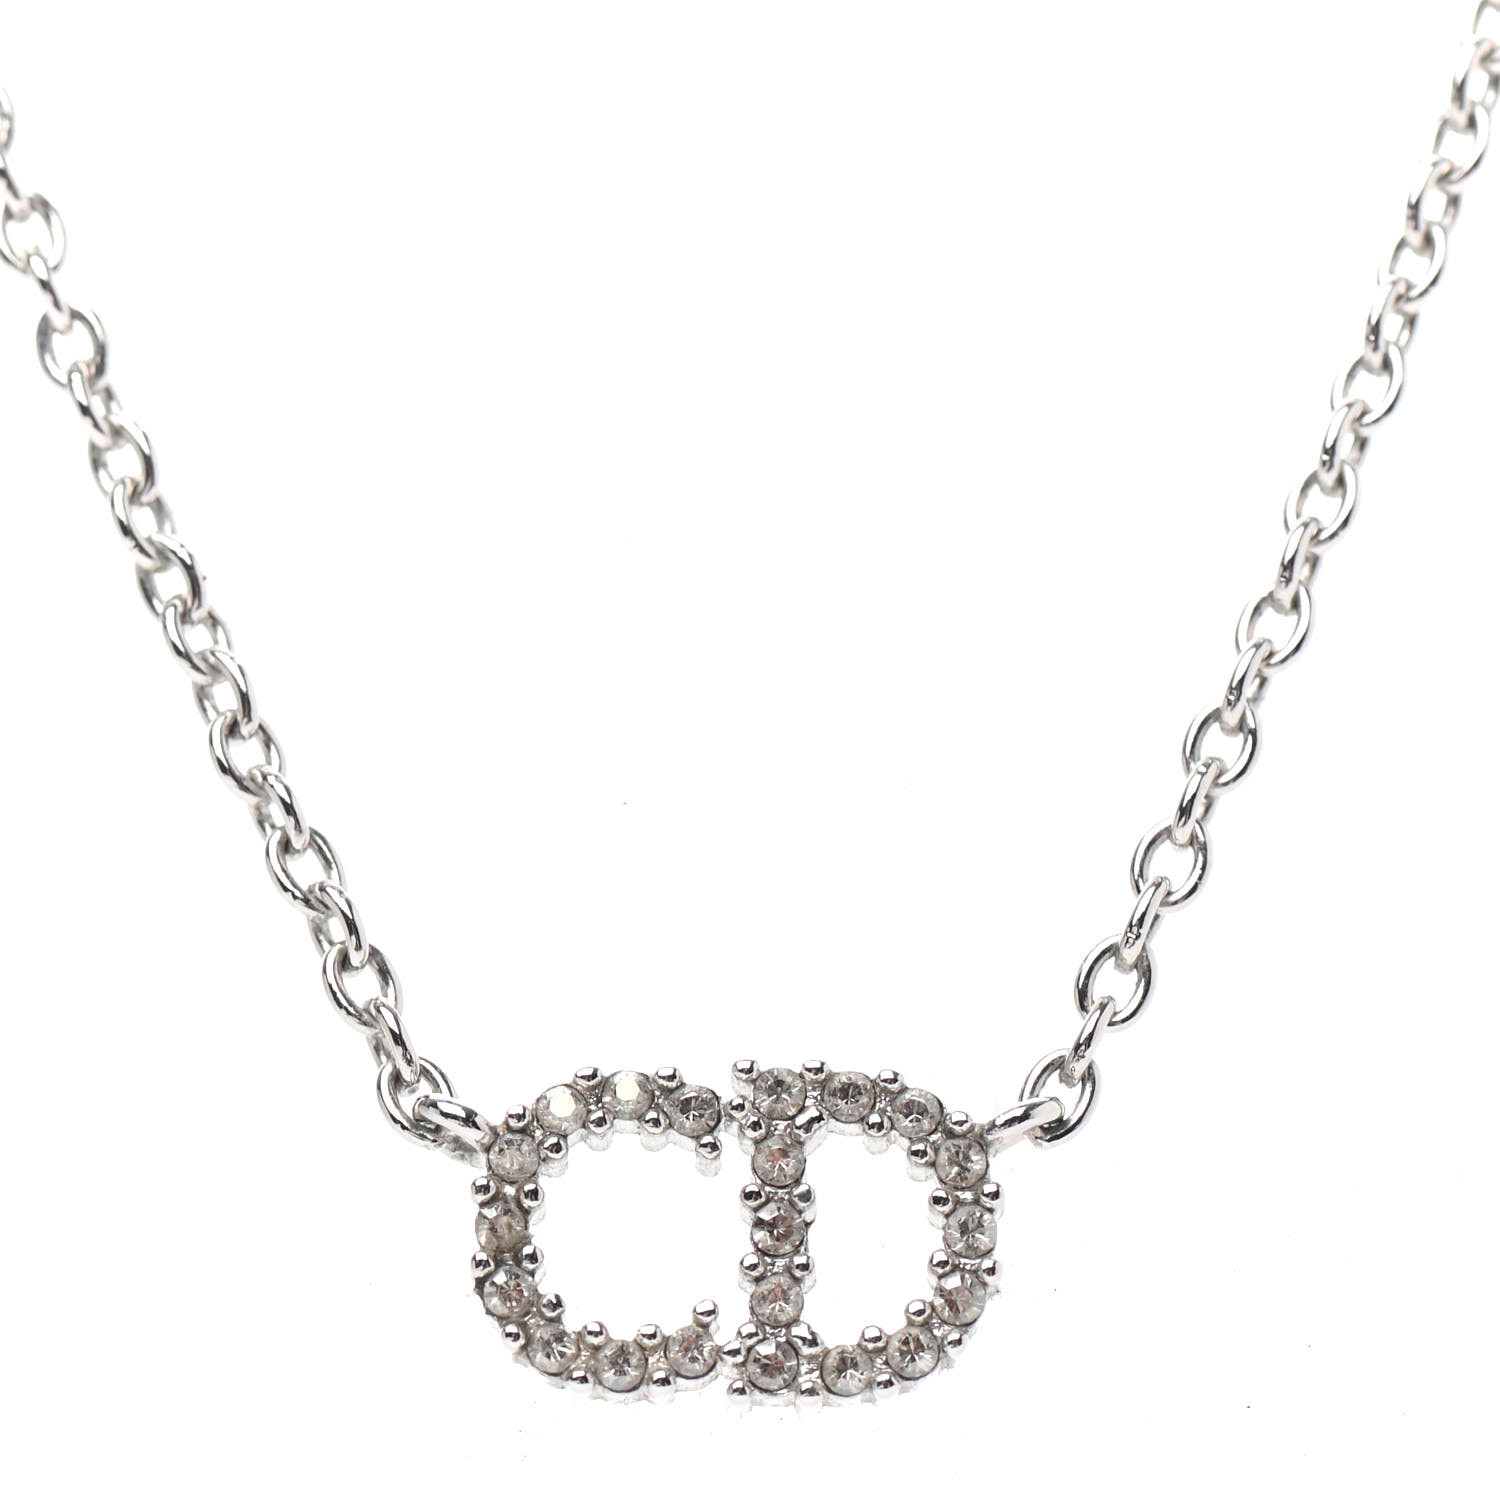 CHRISTIAN DIOR Crystal Clair D Lune Necklace Silver 807227 | FASHIONPHILE